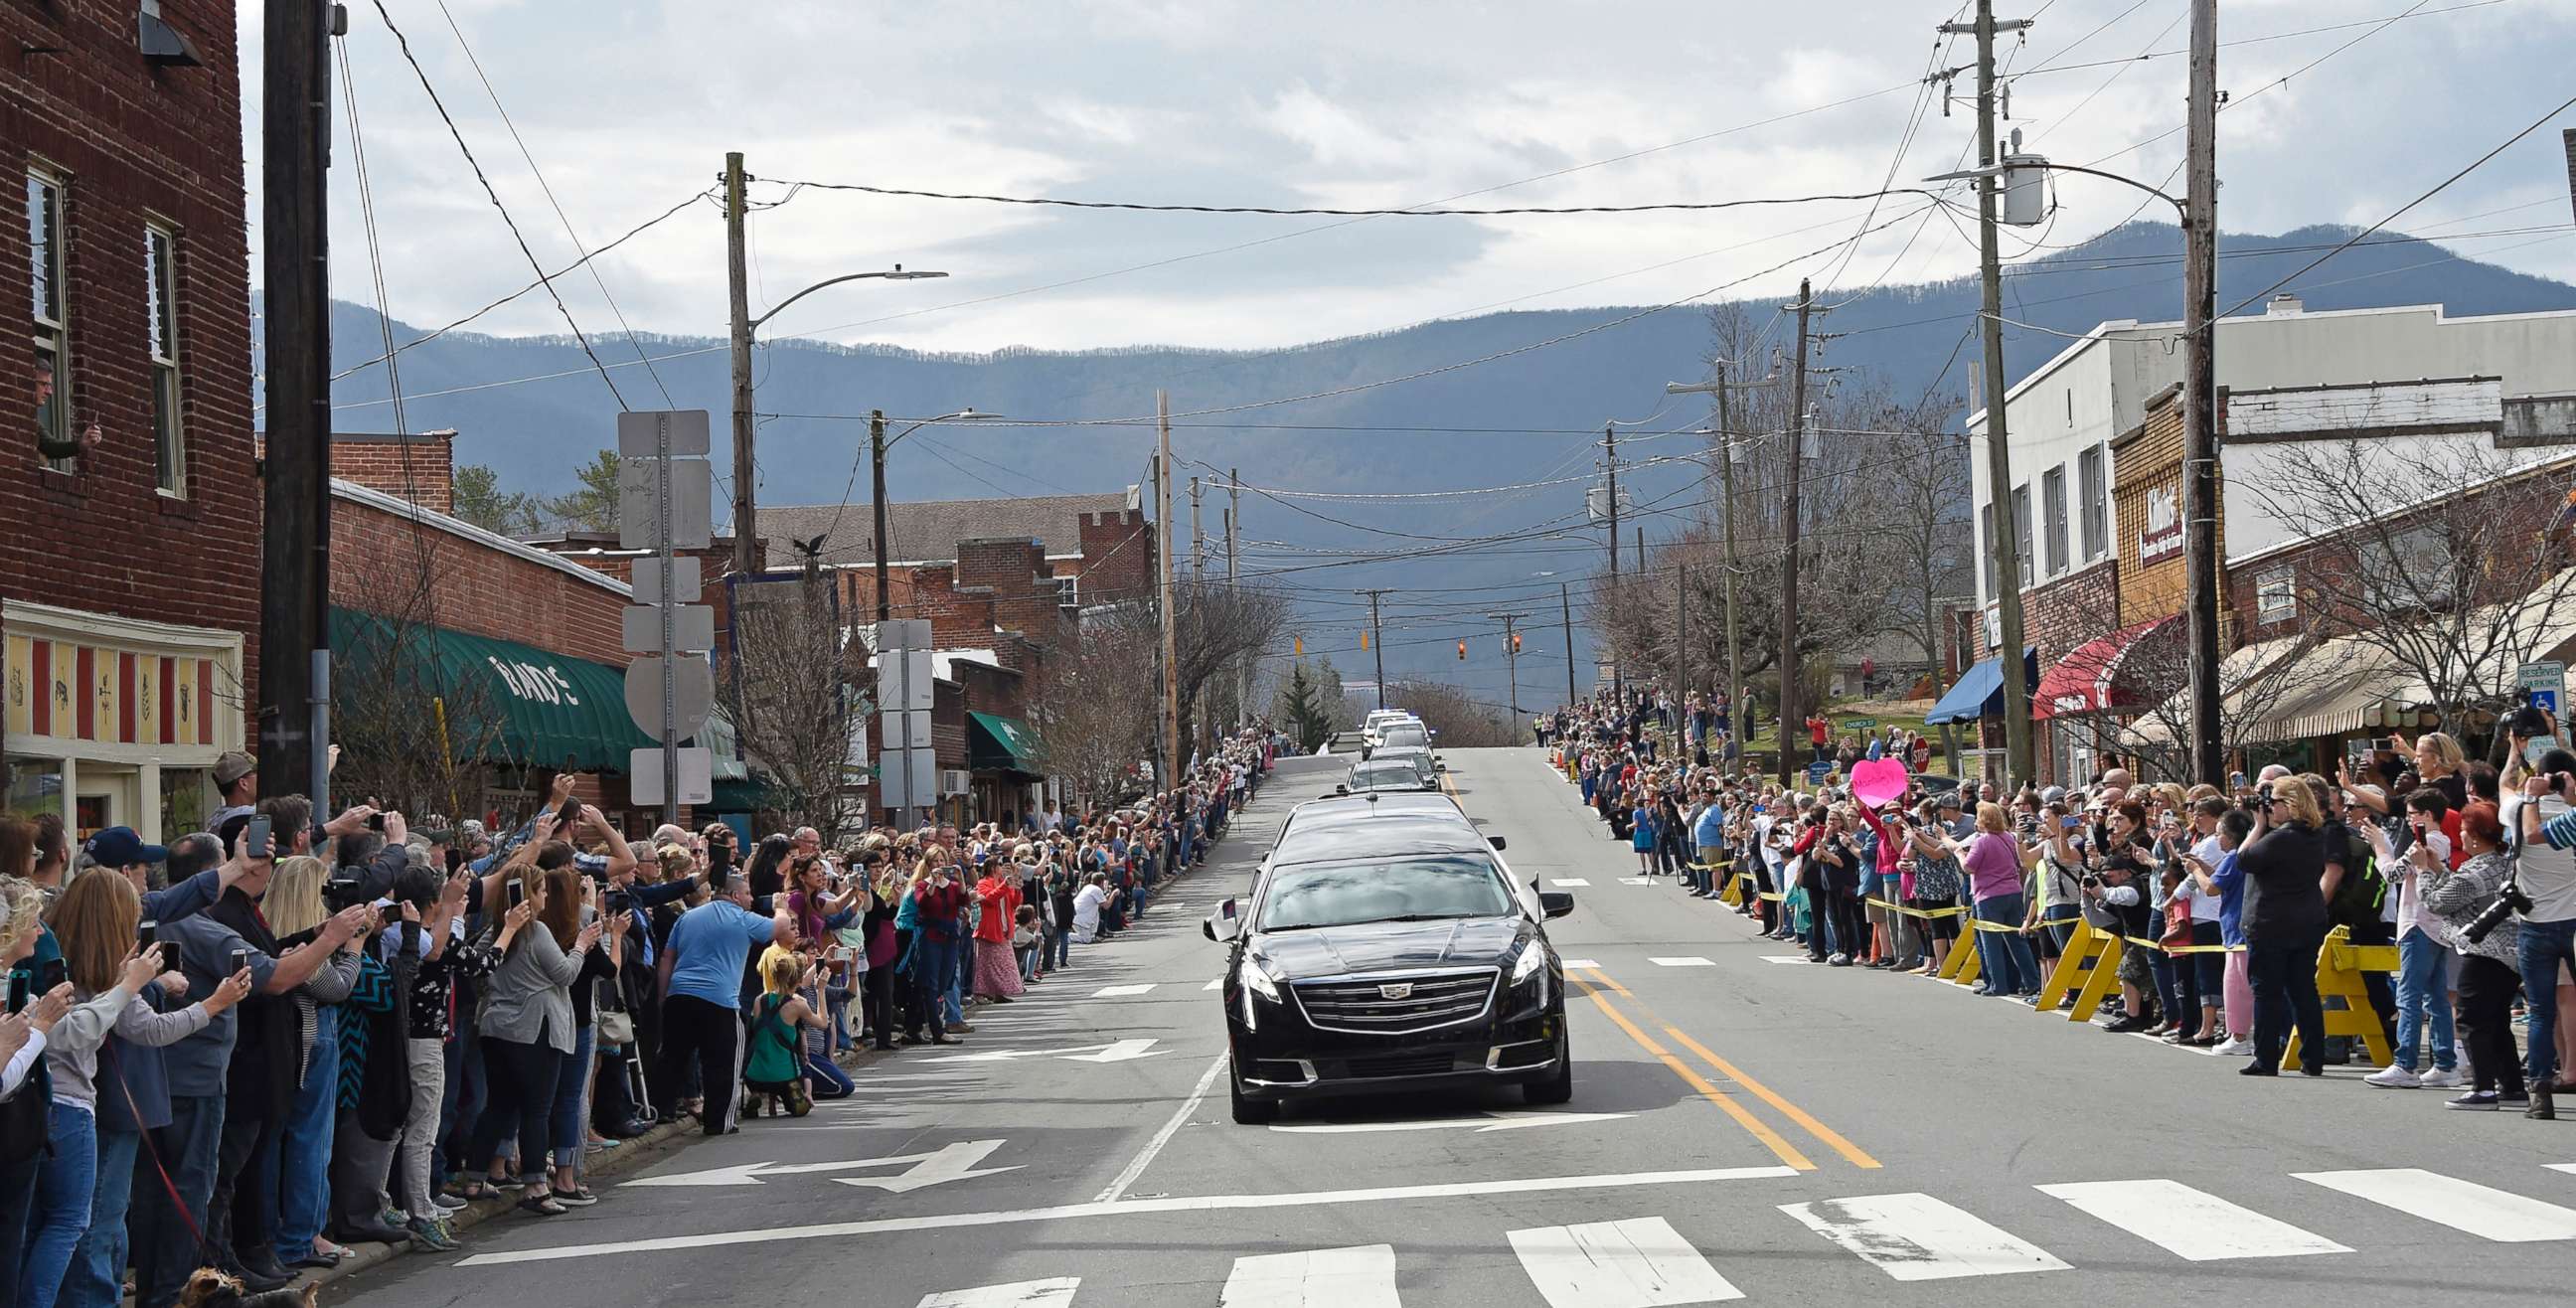 PHOTO: People line the street to pay respects as the hearse carrying the body of Rev. Billy Graham travels through Black Mountain, N.C., Feb. 24, 2018.